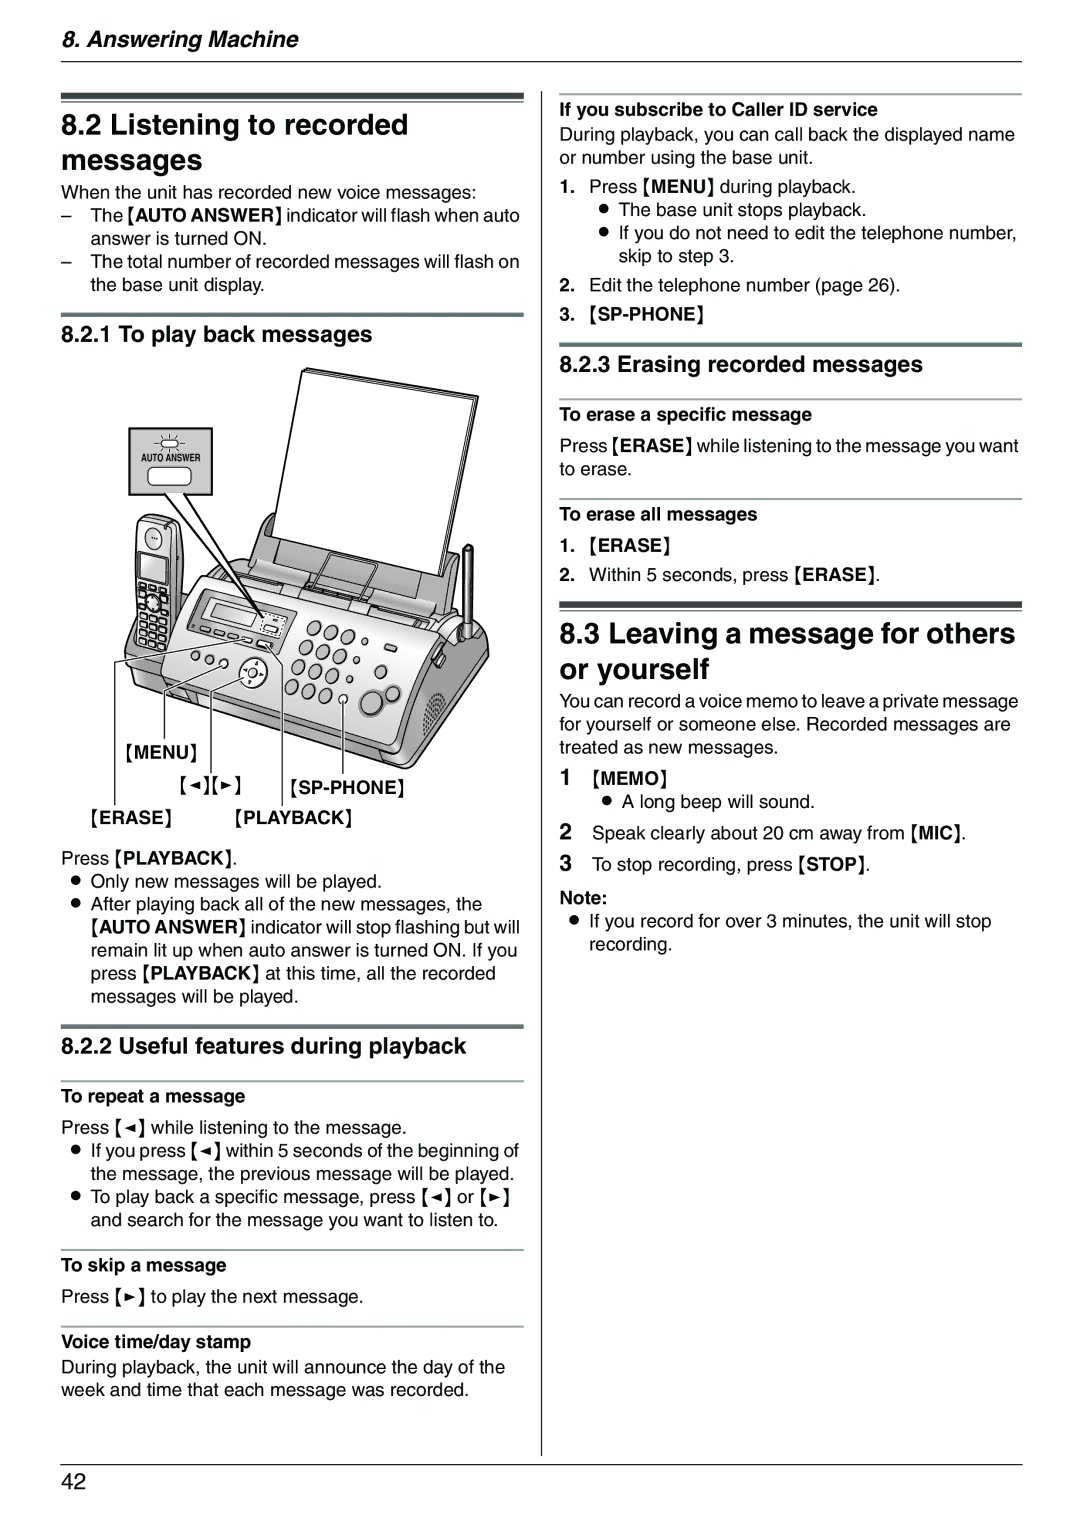 Panasonic KX-FC225NZ manual Listening to recorded messages, Leaving a message for others or yourself, To play back messages 